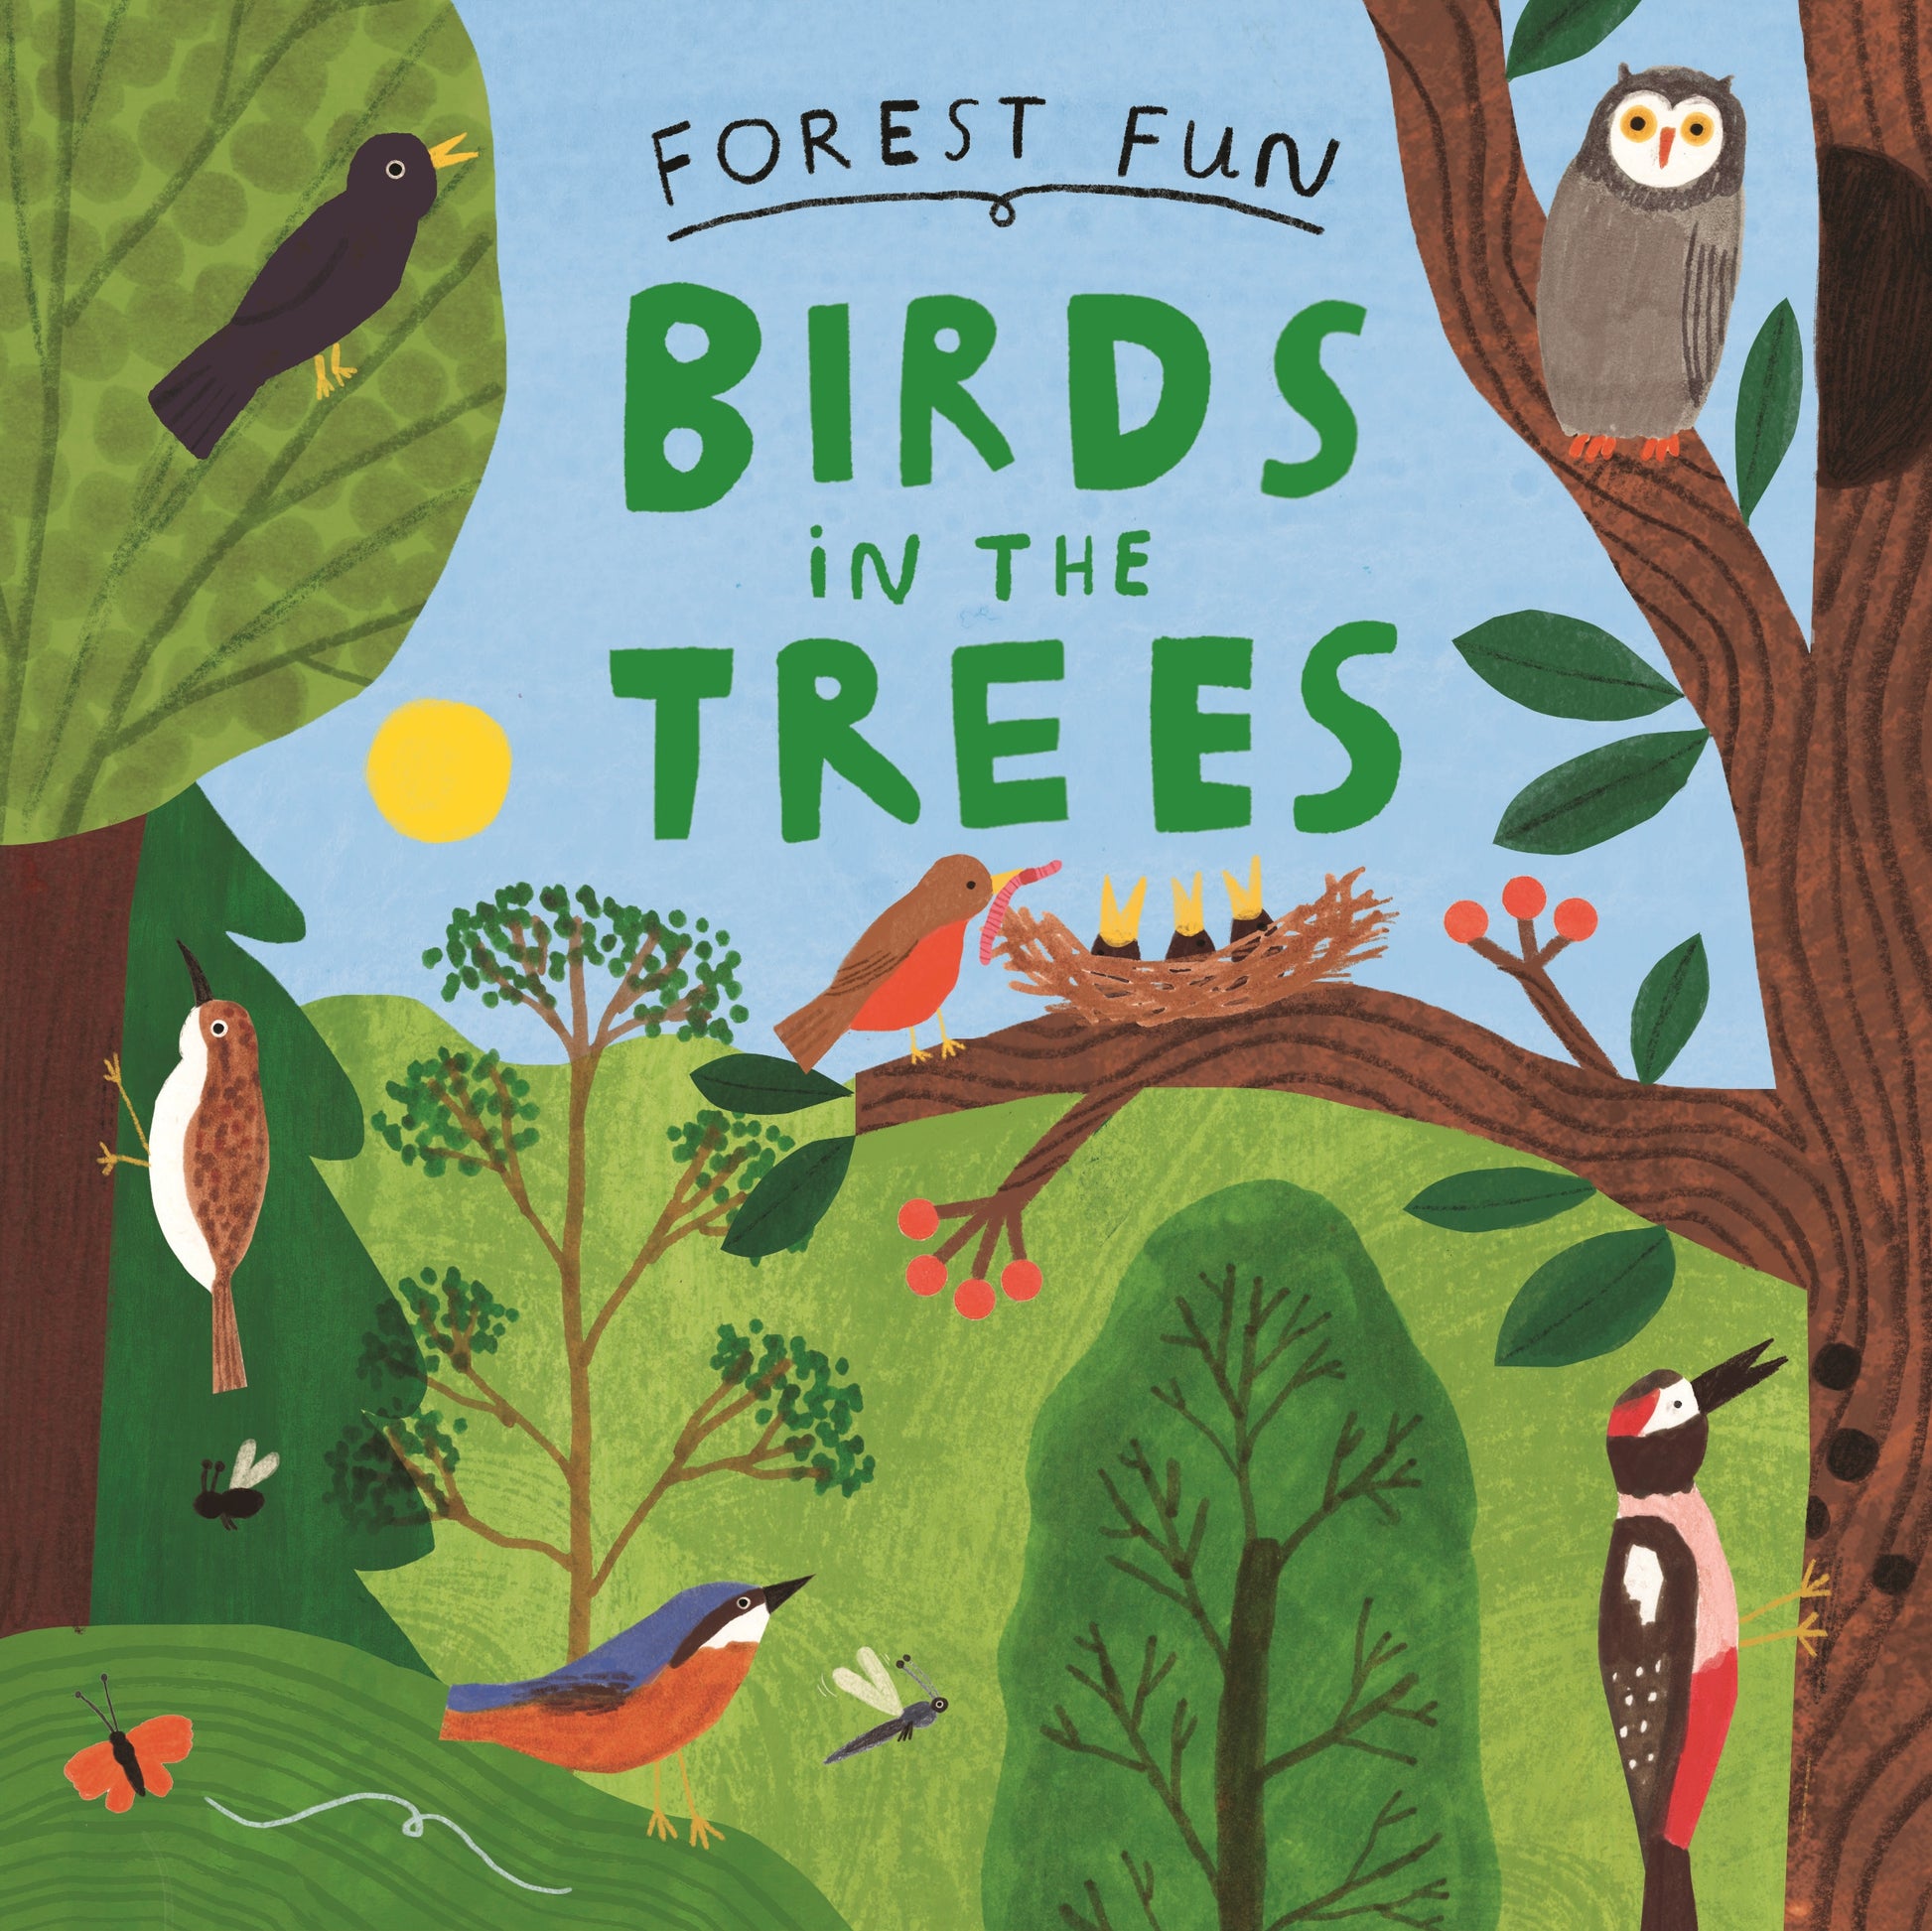 Forest Fun: Birds in the Trees by Susie Williams, Hannah Tolson